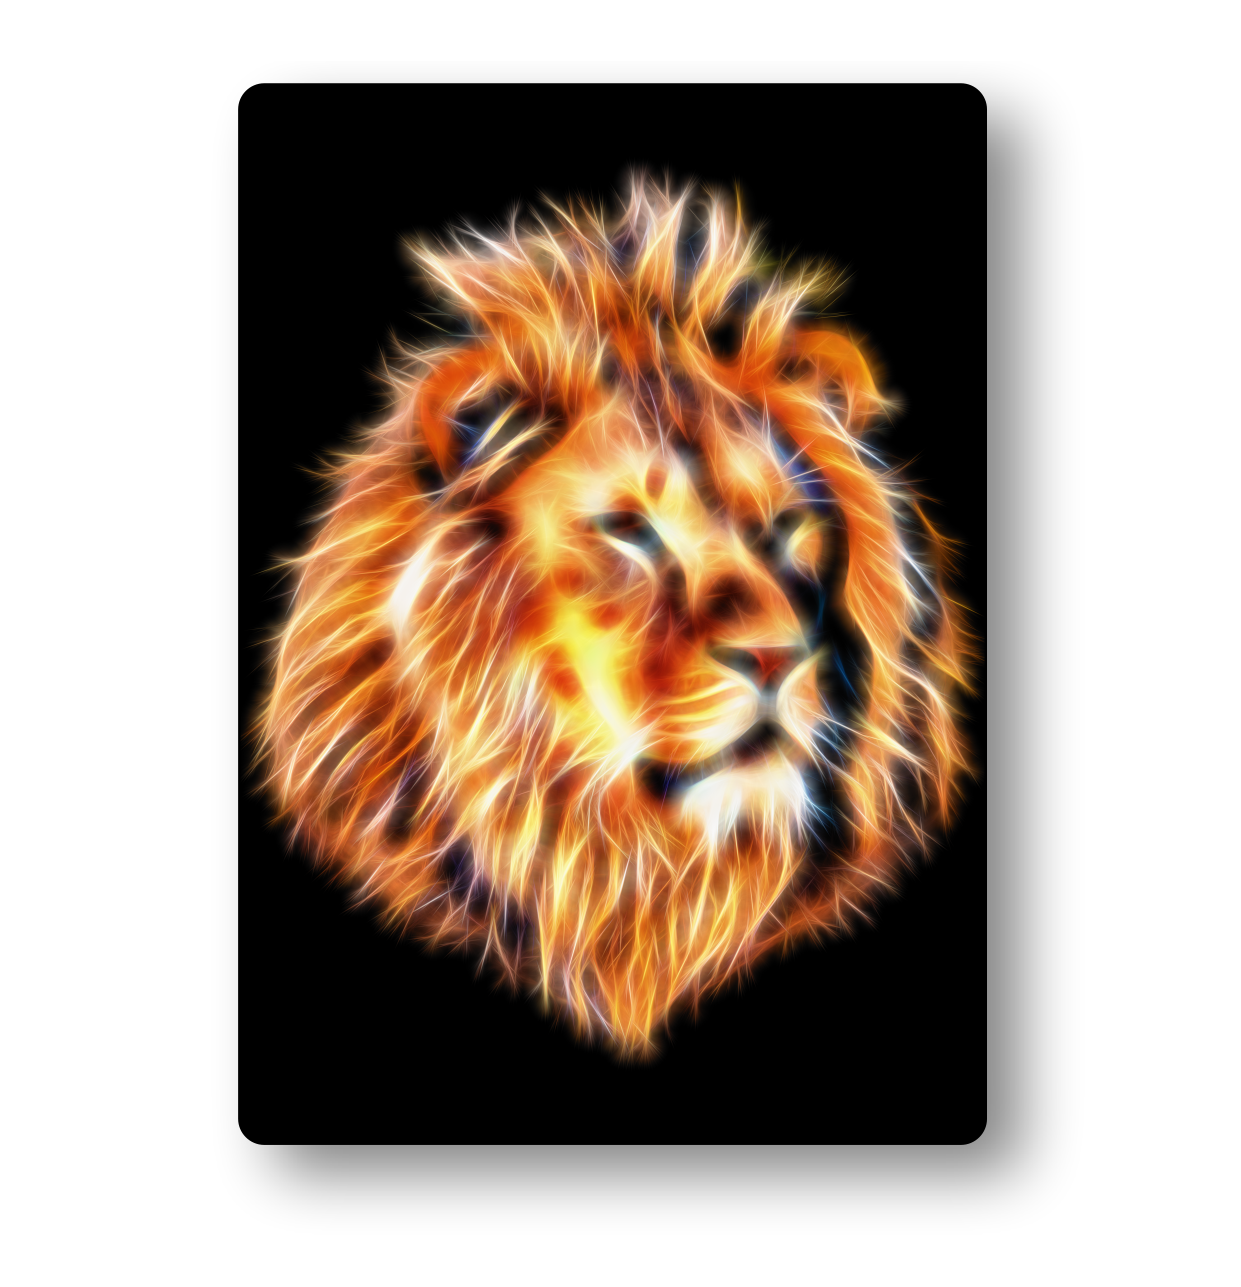 Lion Metal Wall Plaque